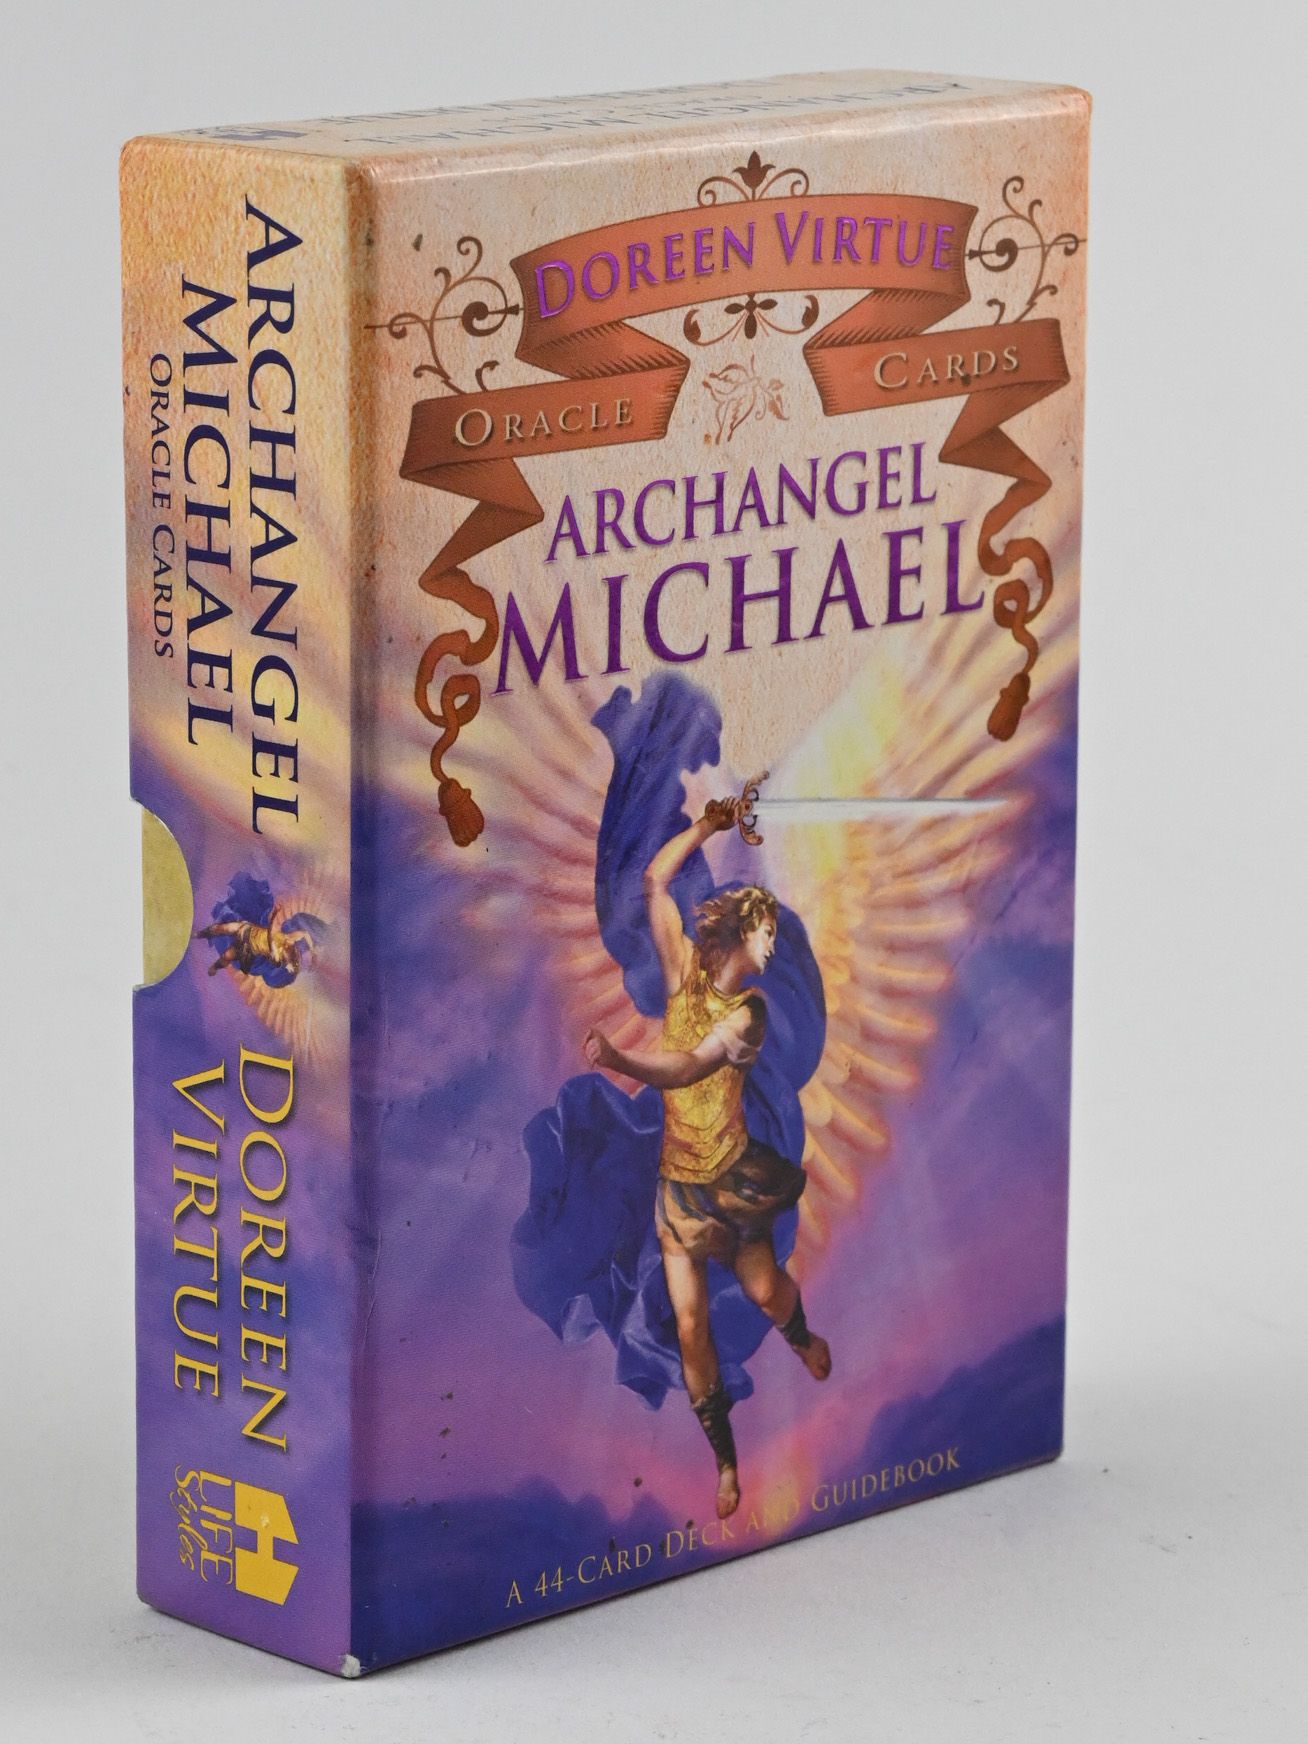 DOREEN VIRTUE - Archangel Michael Oracle Cards Karty